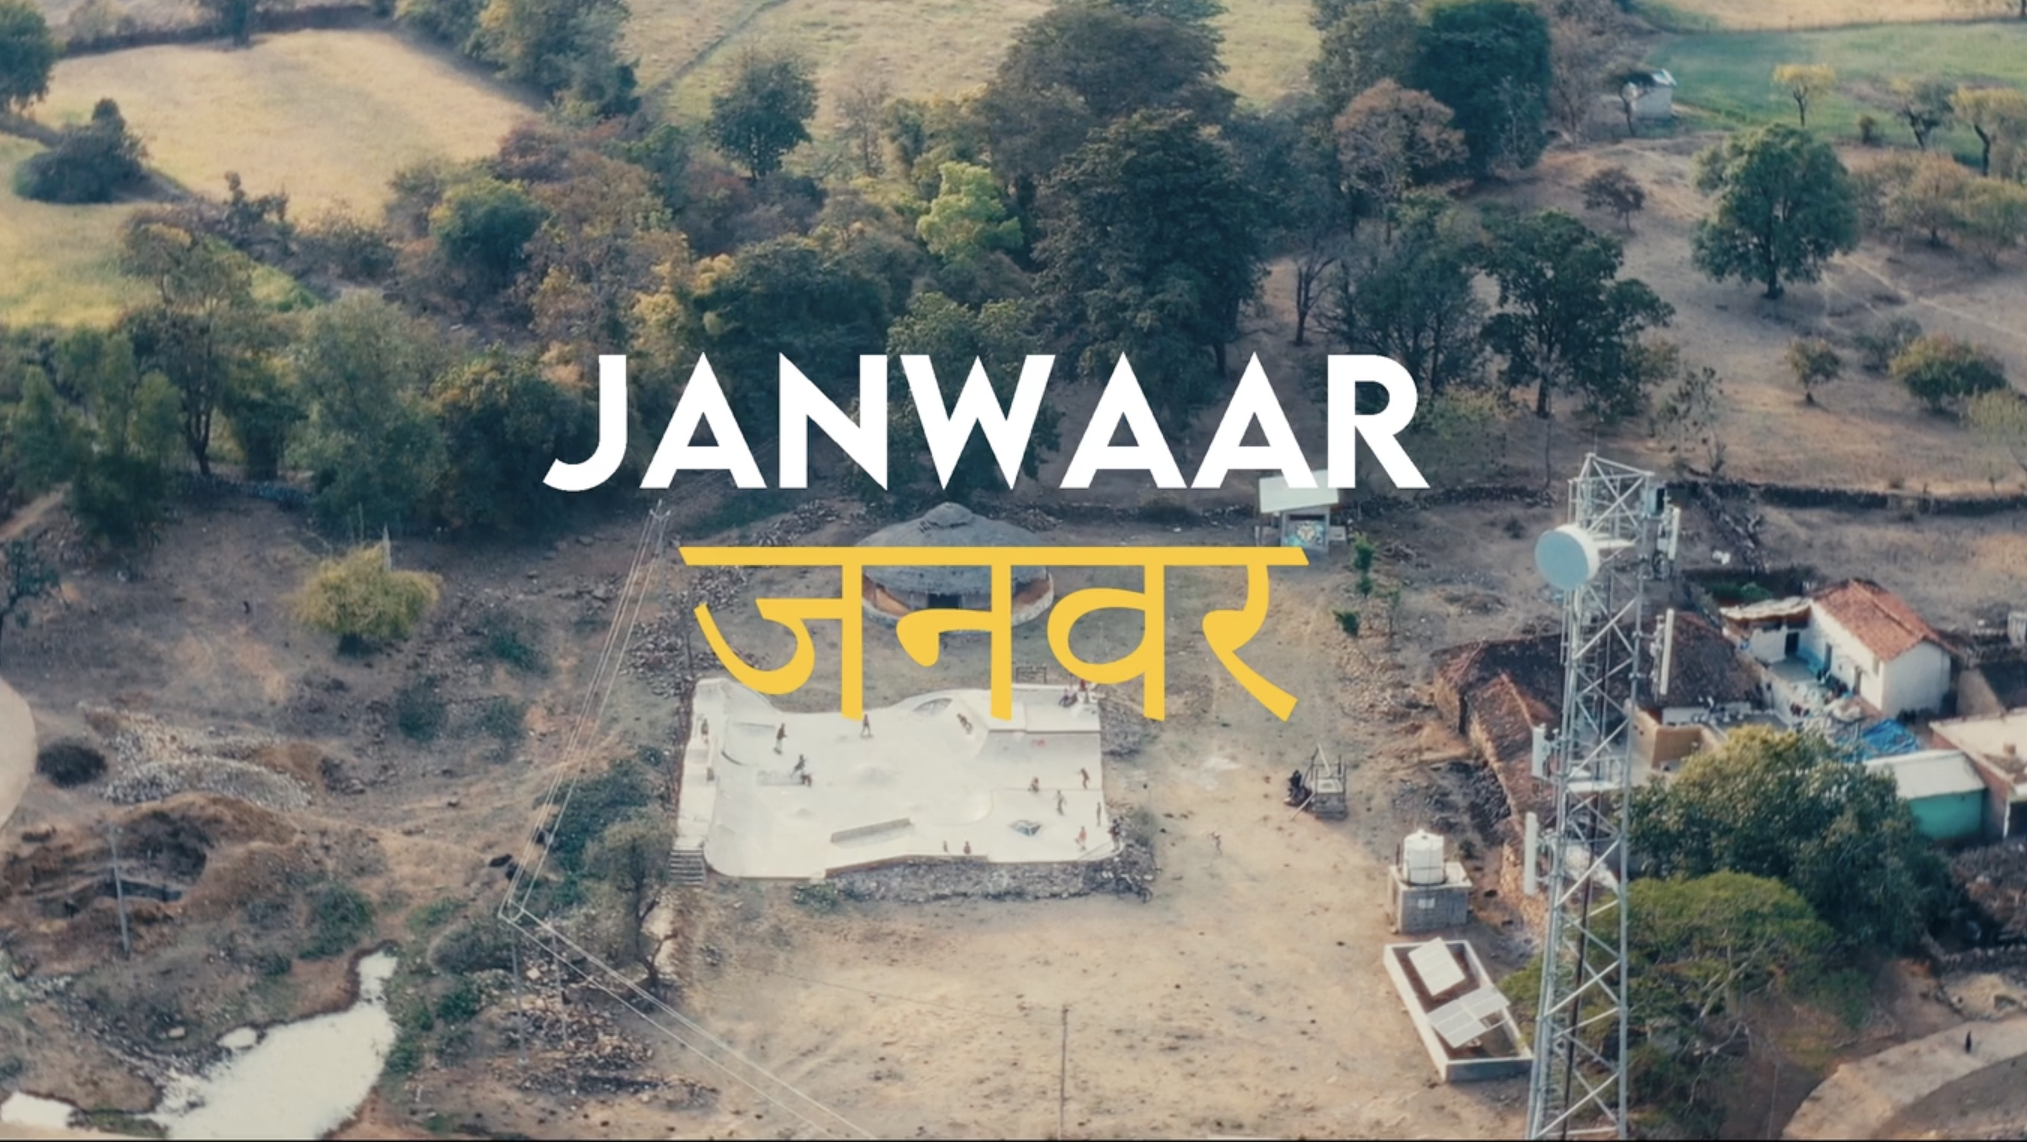 Aerial view of a rectangular skateboarding ring in the countryside surrounded by dirt. Trees, a few houses and a tower with an antenna nearby. Title: "Janwaar," underneath appears the title in Hindi characters.